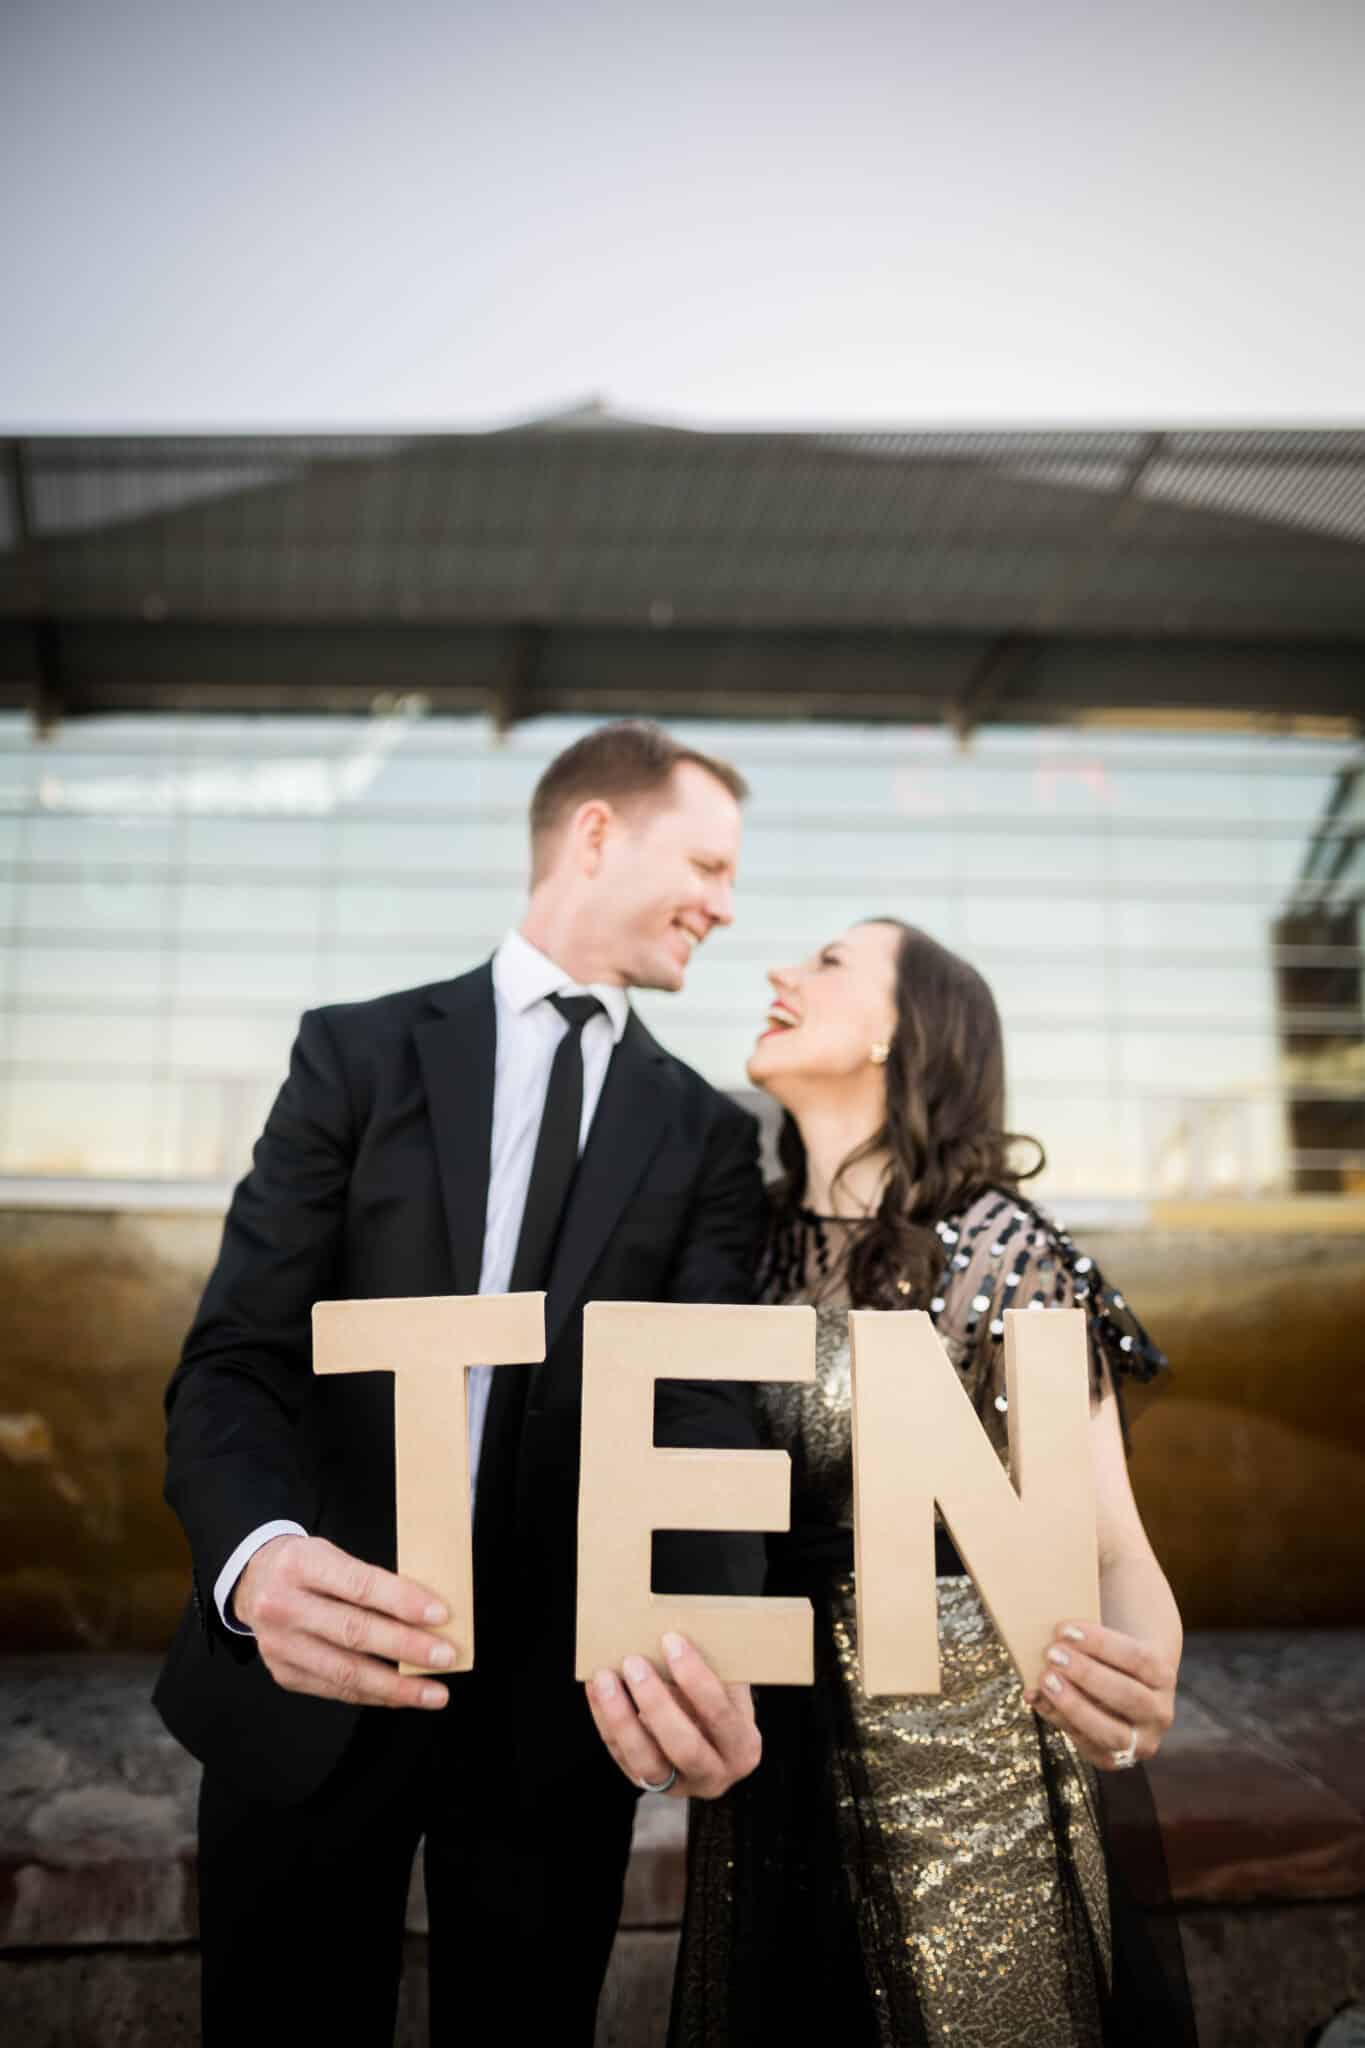 10 Years of Marriage: 10 Key Marriage Success Tips We’ve Learned This Decade